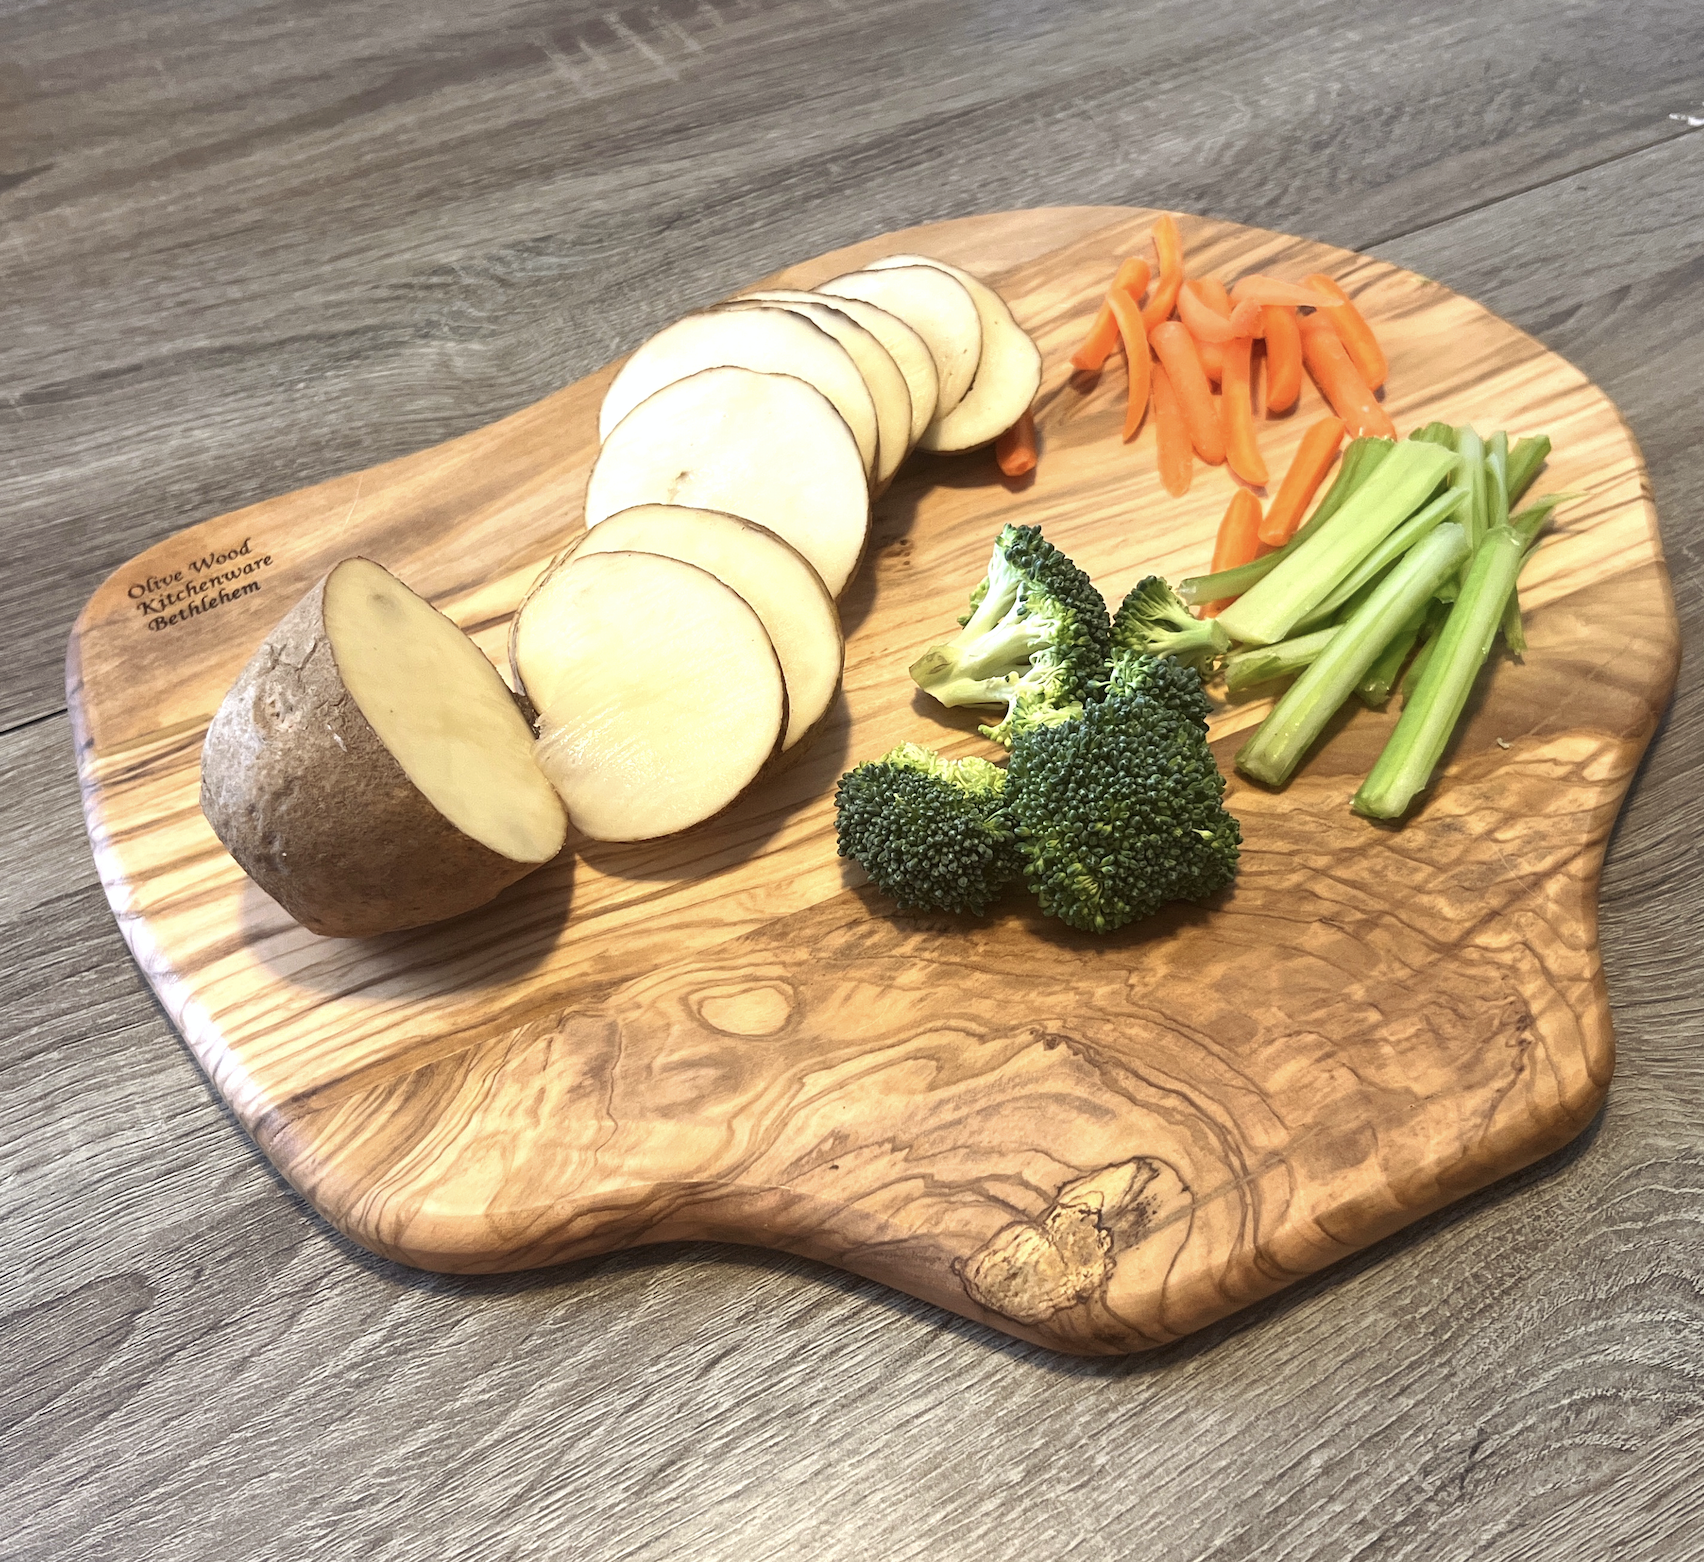 Reseller and retailer page for olive wood chopping boards, bowls, & more